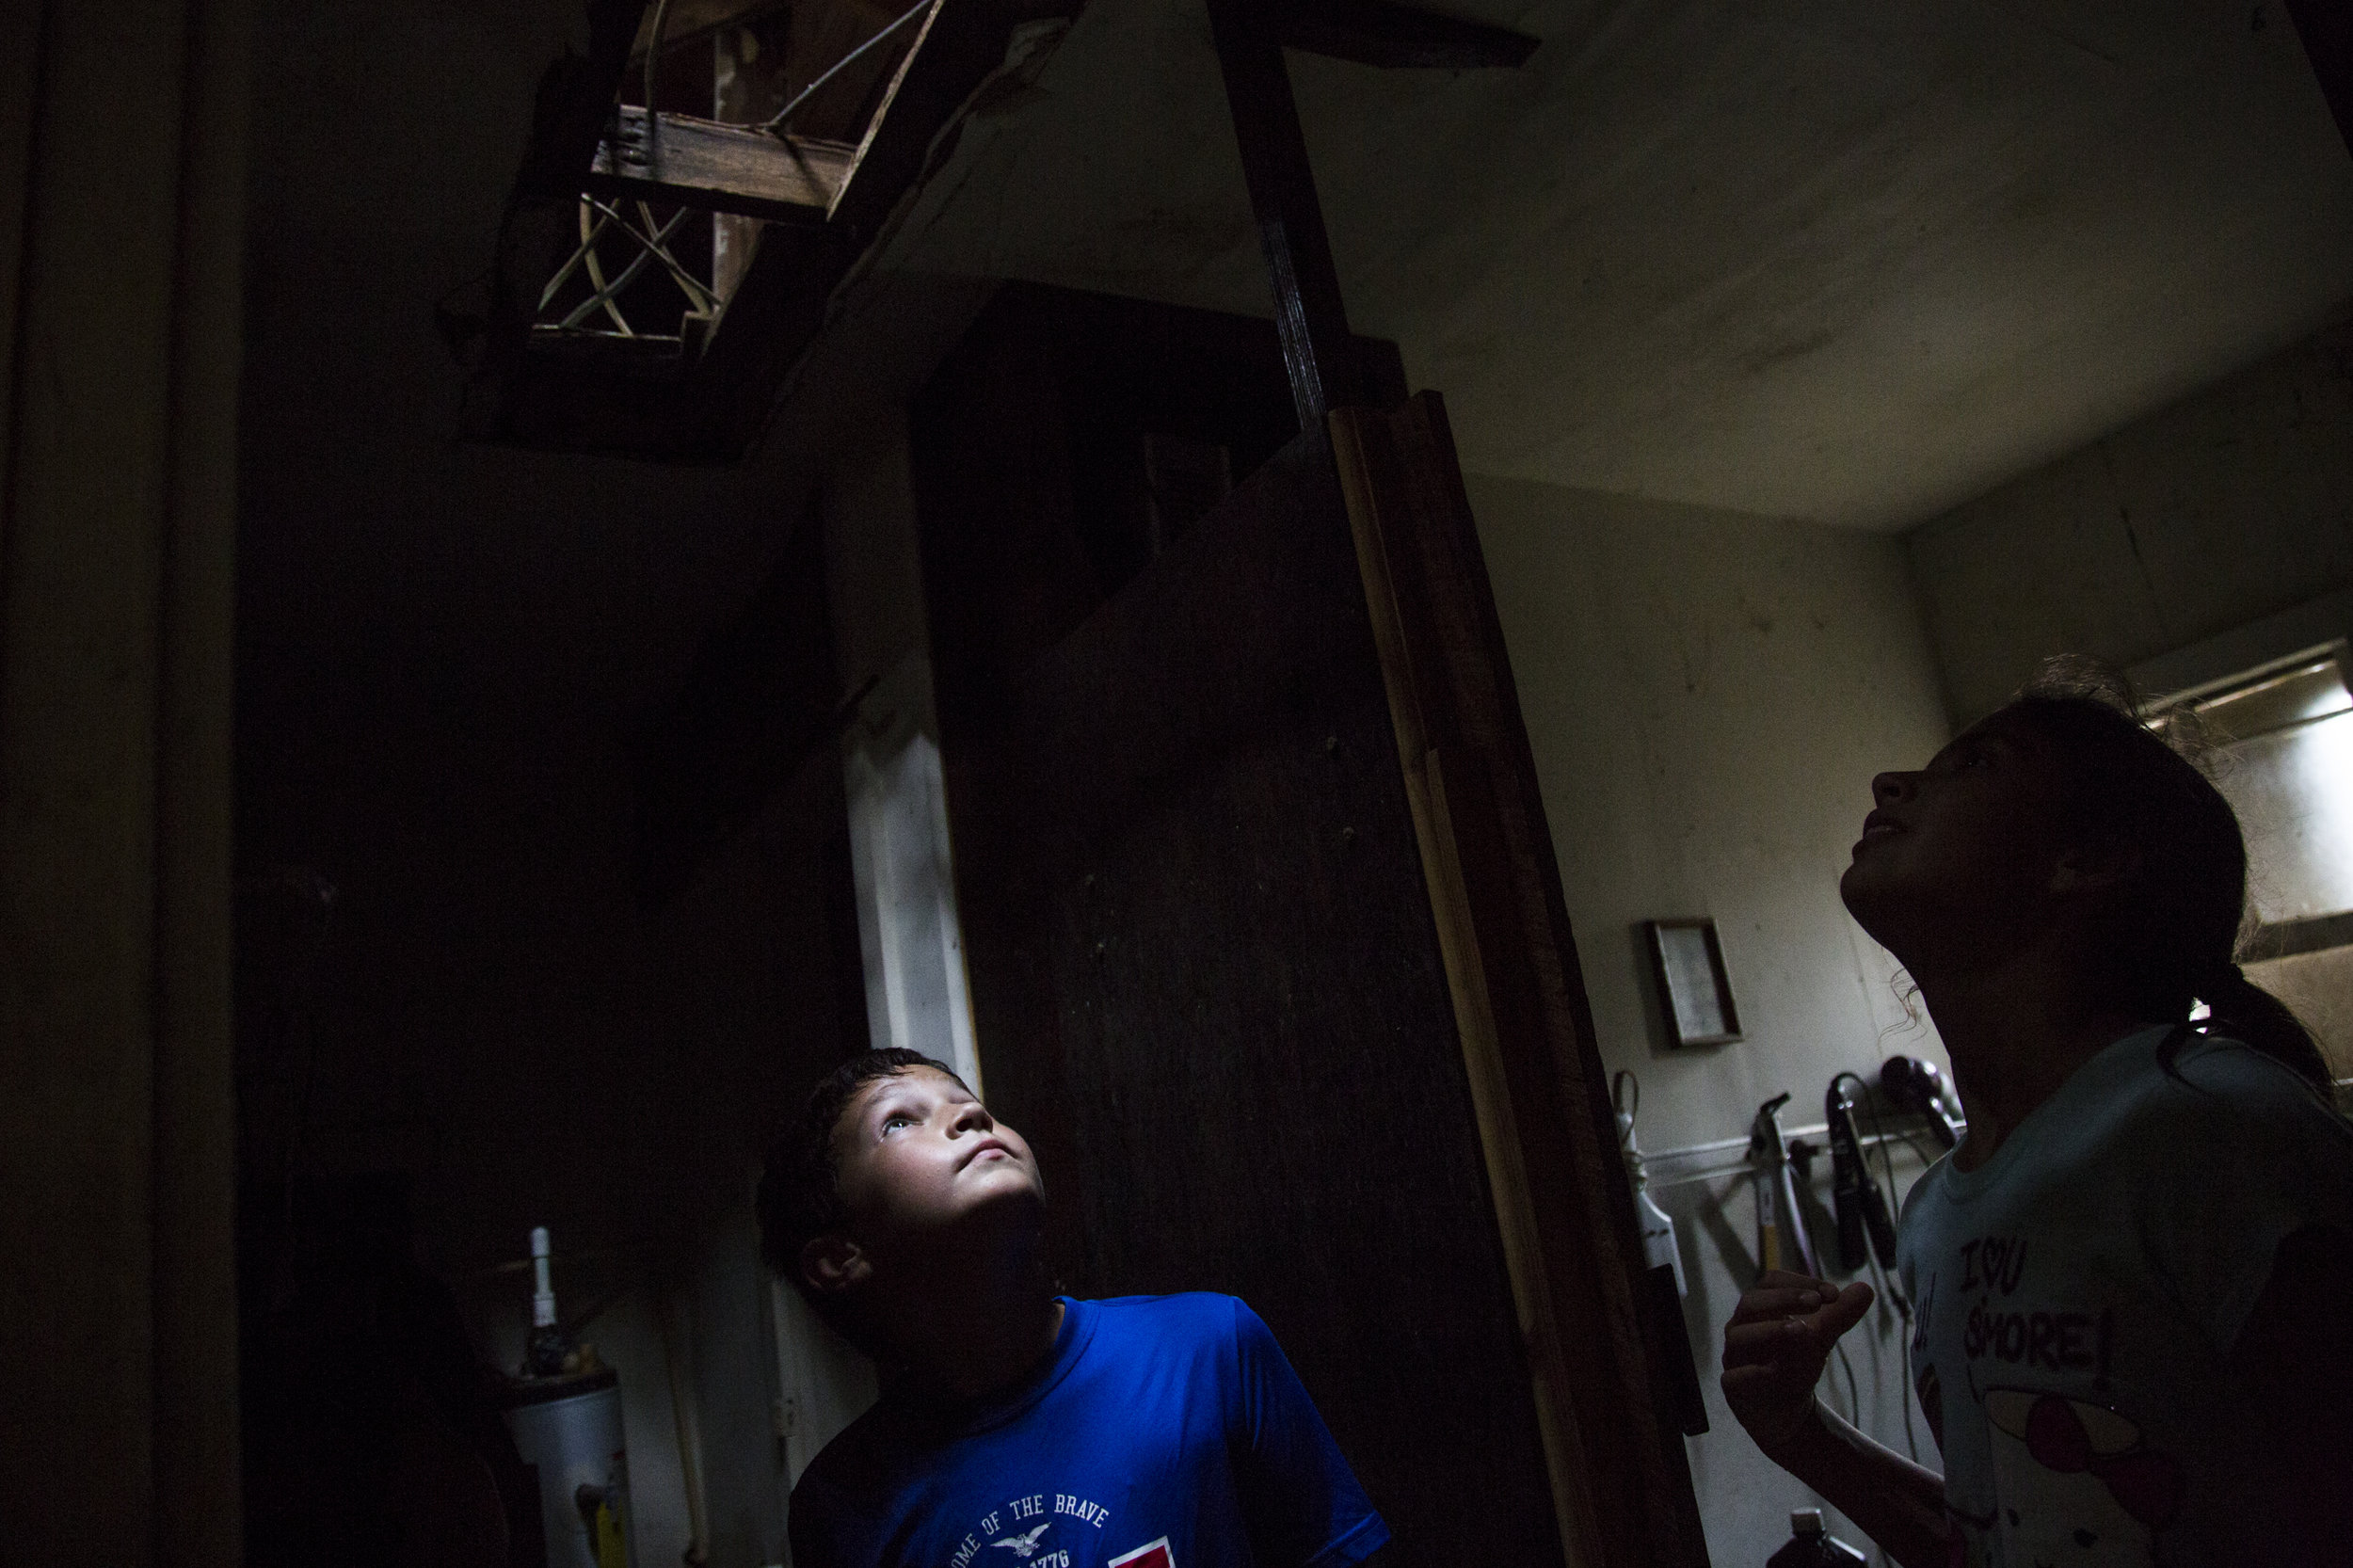  Kyler Carpenter, 10, left, and Laela Carpenter, 11, look up through a hole that was torn in their roof by Hurricane Harvey. The cousins surveyed the damage on Aug. 27, 2017 to Laela’s family home in Bayside, Texas. 